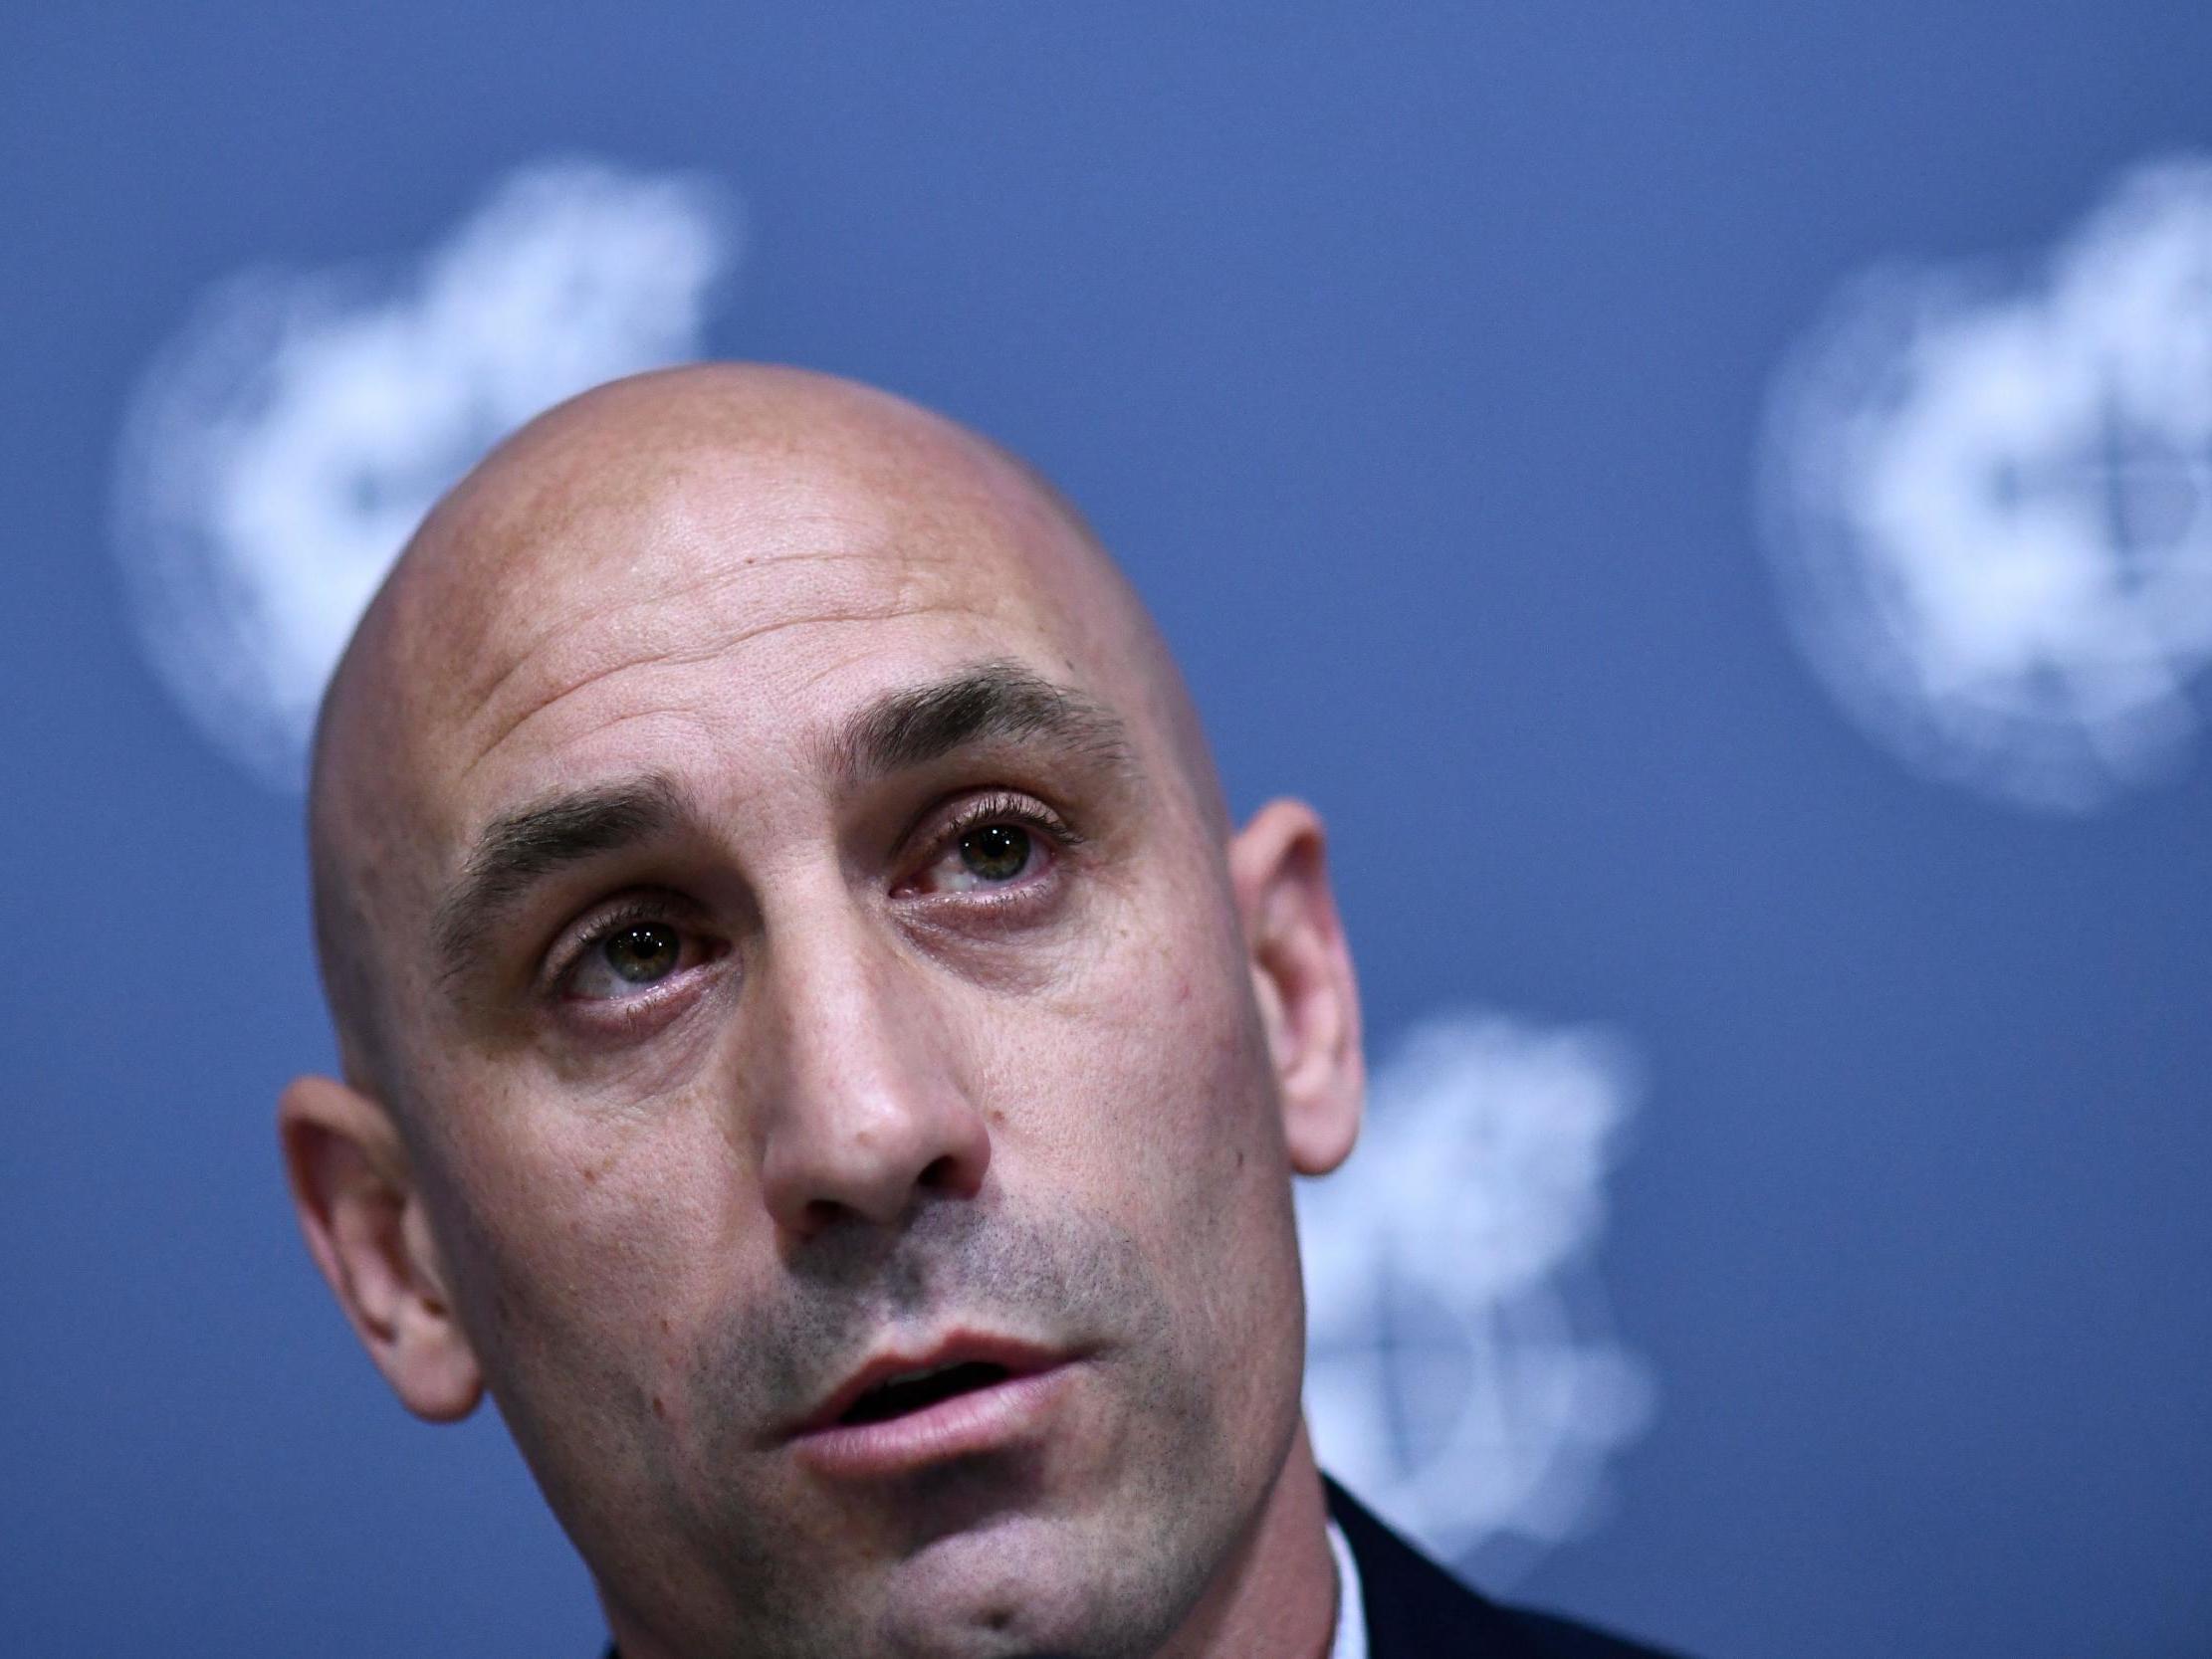 Luis Rubiales is facing trouble moving the Spanish Supercup to Saudi Arabia